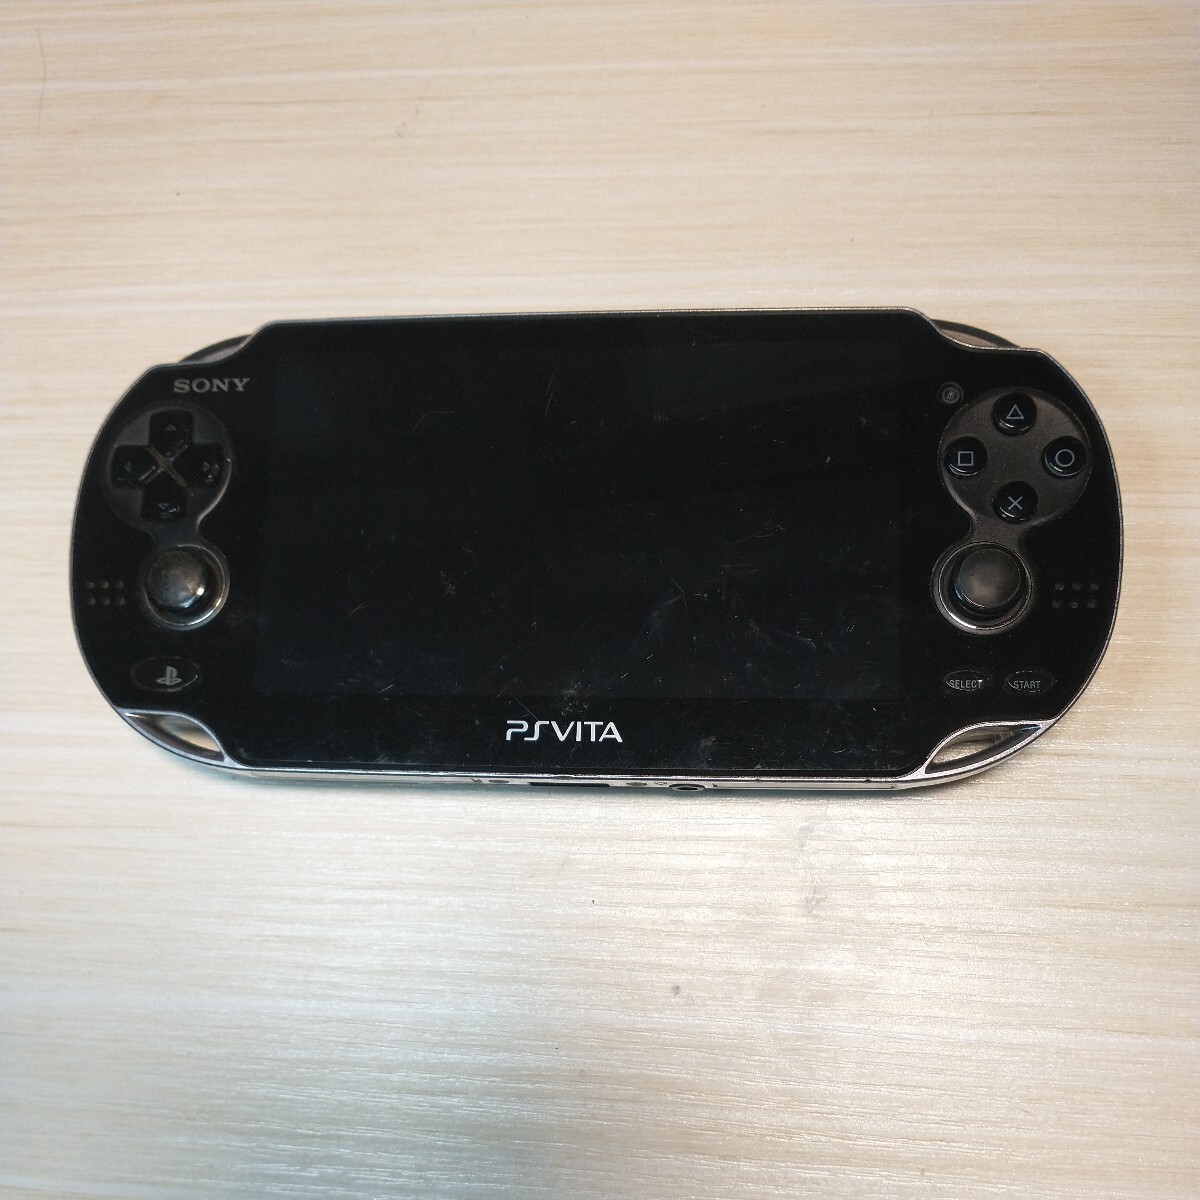 SONY PlayStation Vita PSVITA PCH-1100 black used the first period . settled 